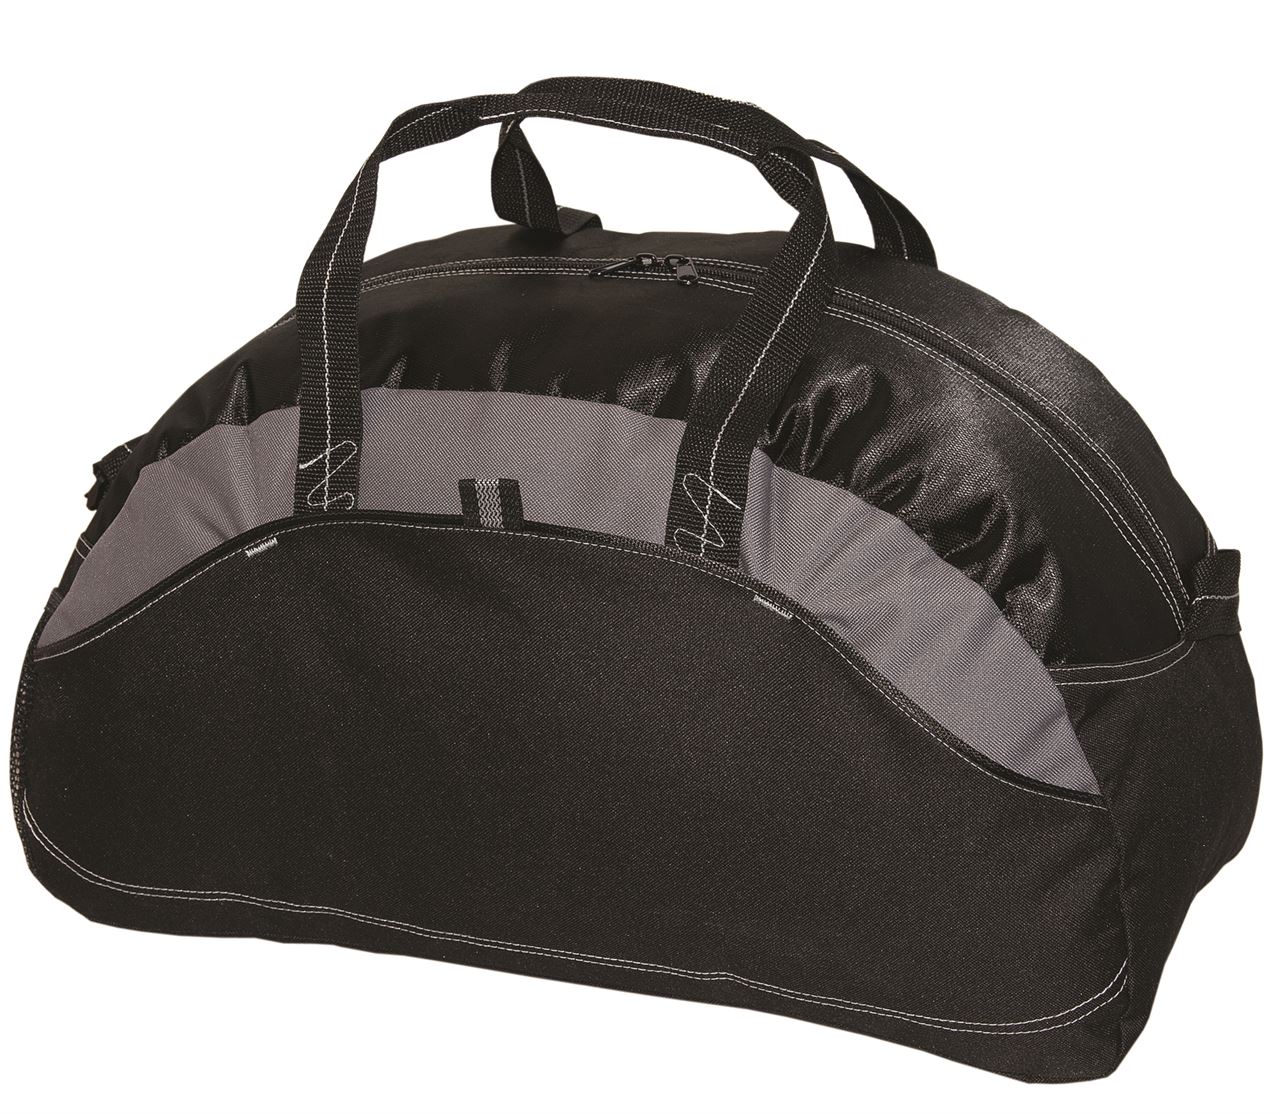 Picture of Cobalt 21" Sports Bag